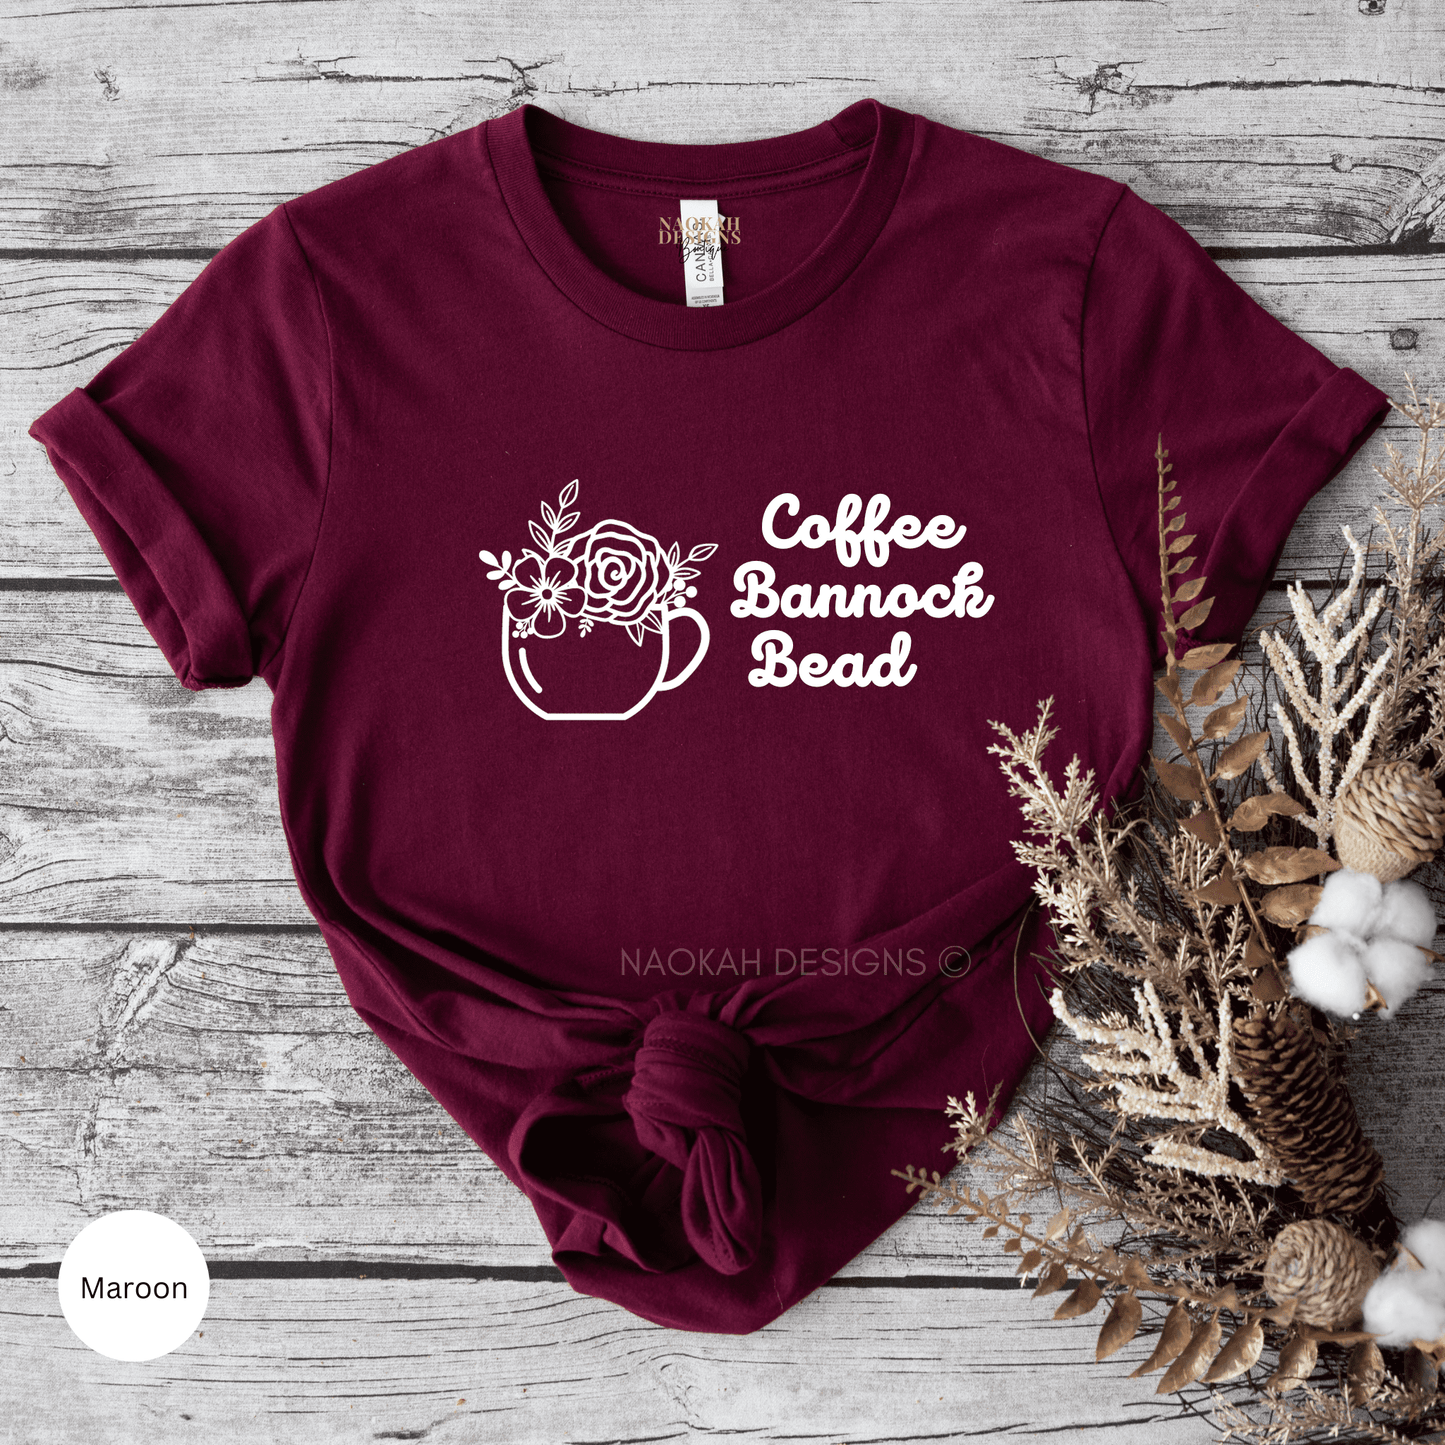 coffee bannock bead shirt, bead love coffee shirt, bead collector, gift for crafter, gift for beader, indigenous owned shop, bead giftcoffee bannock bead shirt, bead love coffee shirt, bead collector, gift for crafter, gift for beader, indigenous owned shop, bead gift